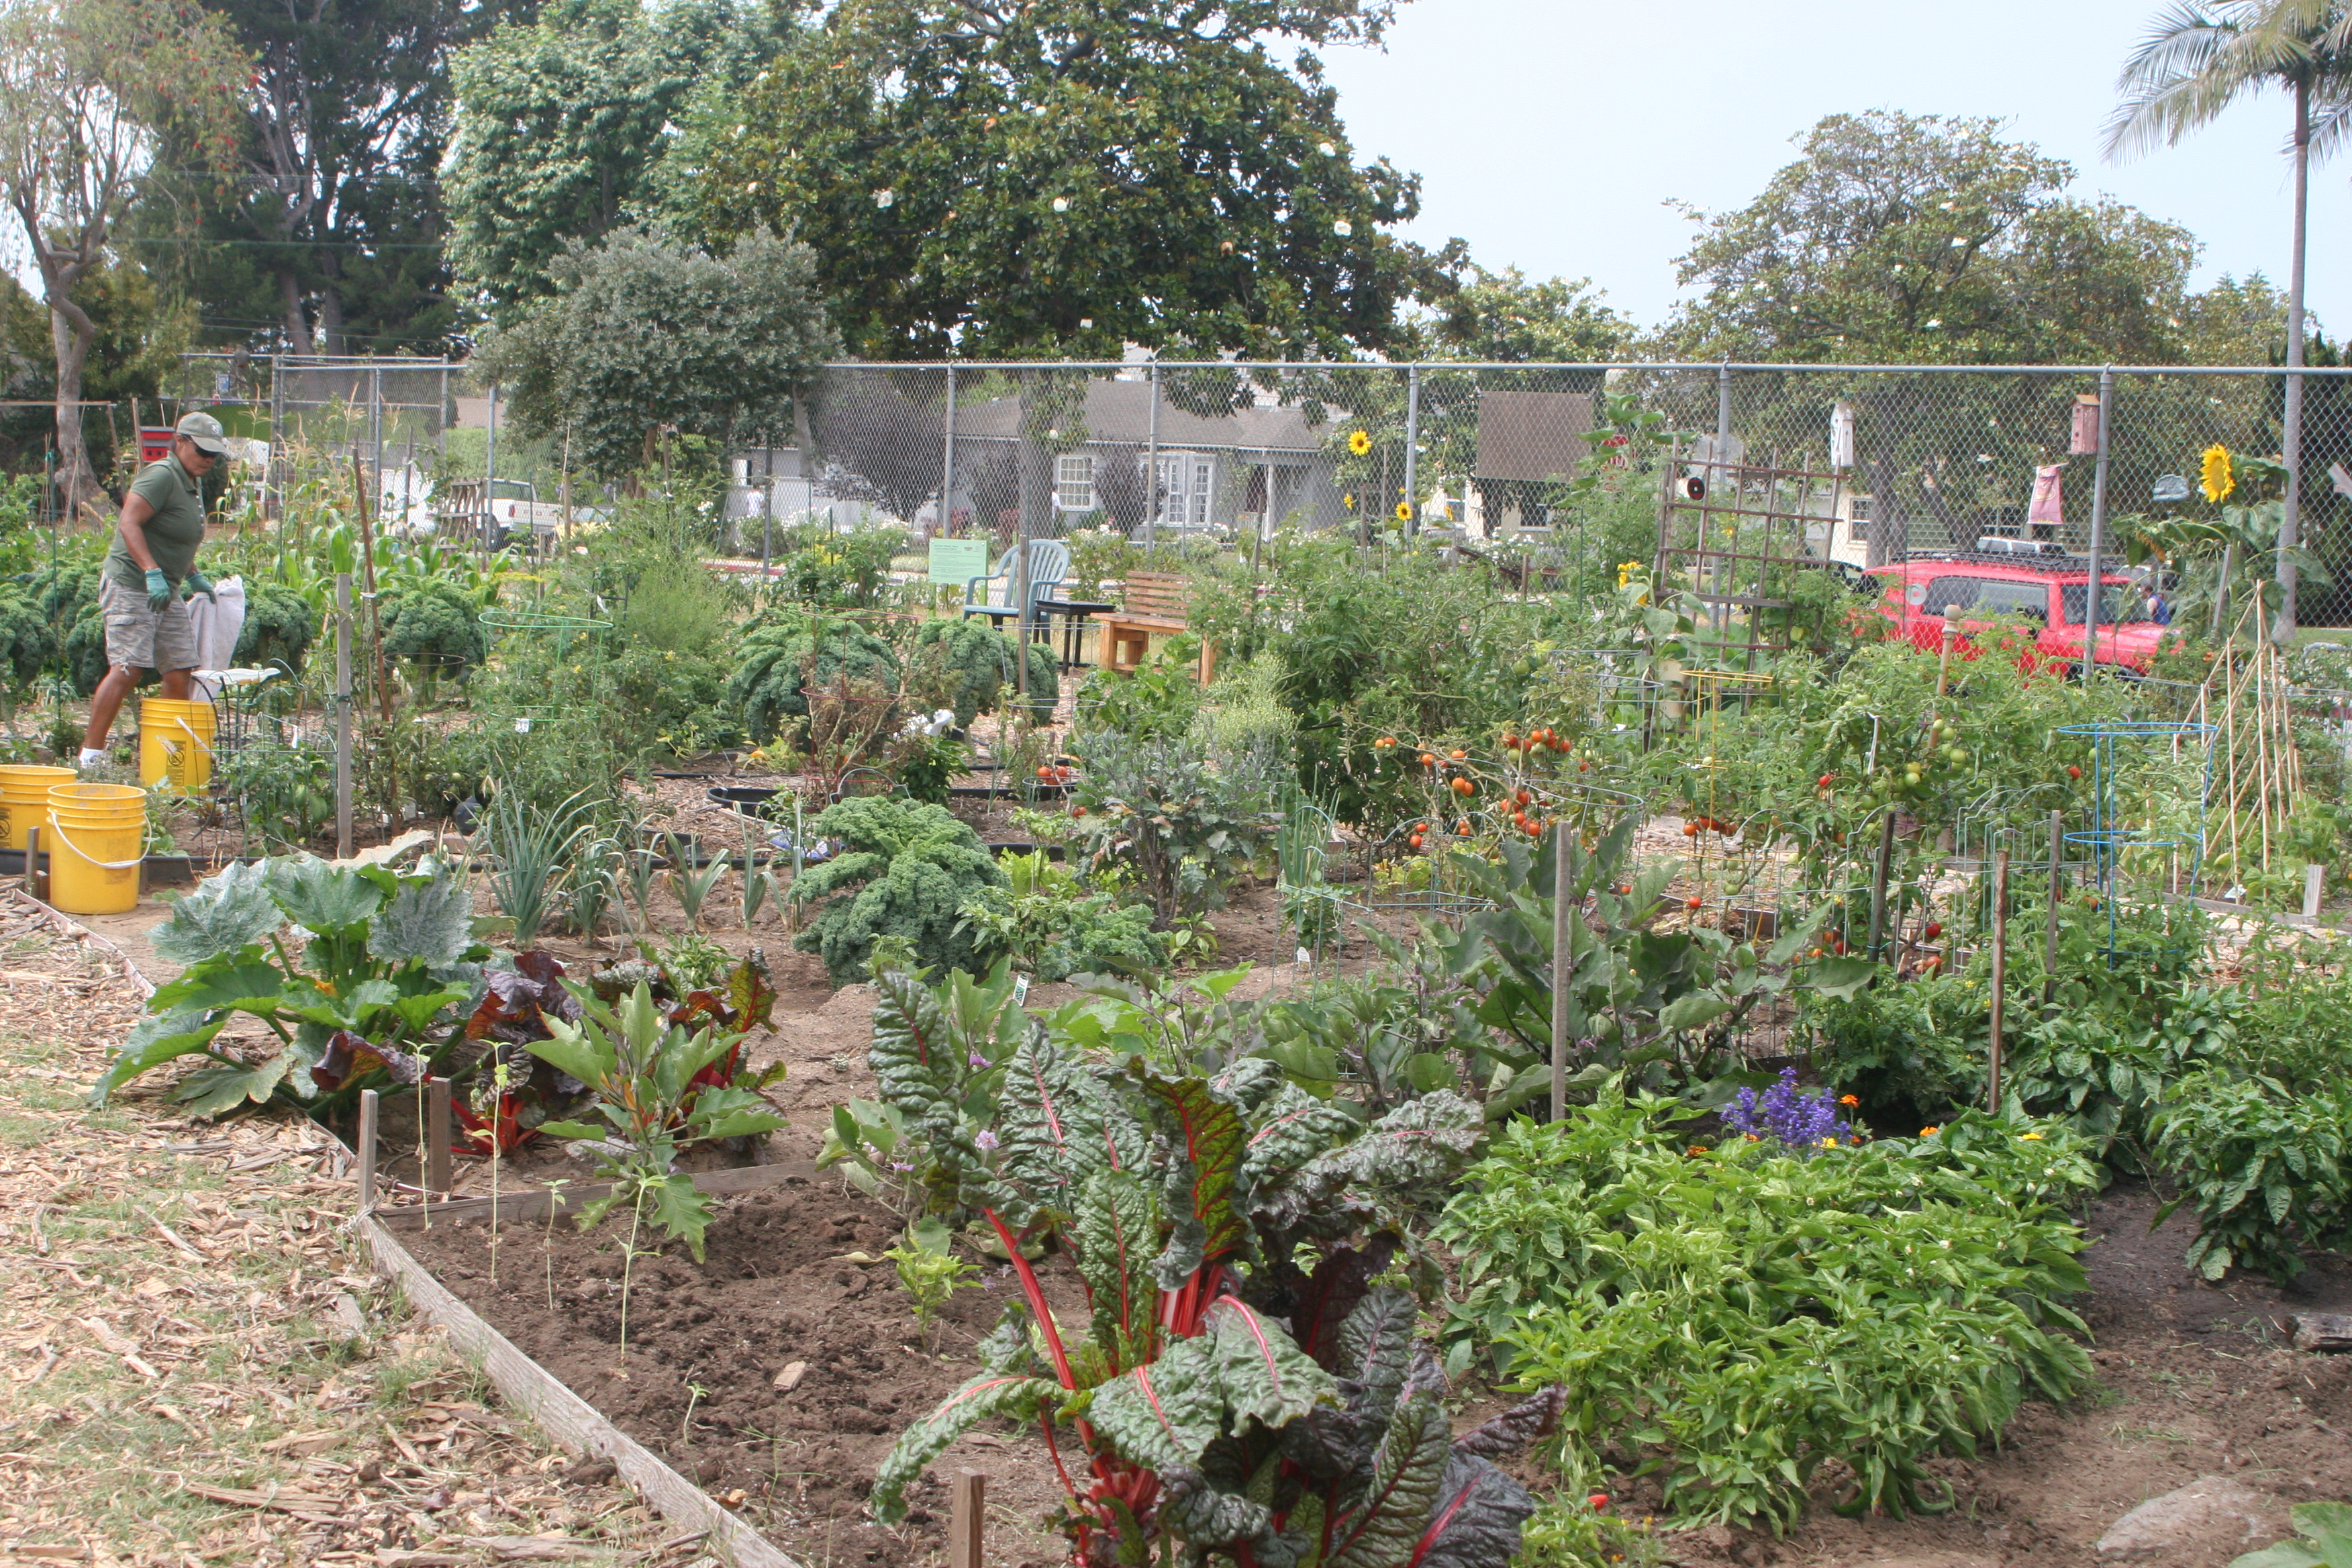 Emerson Avenue Garden works to grows vegetables and community